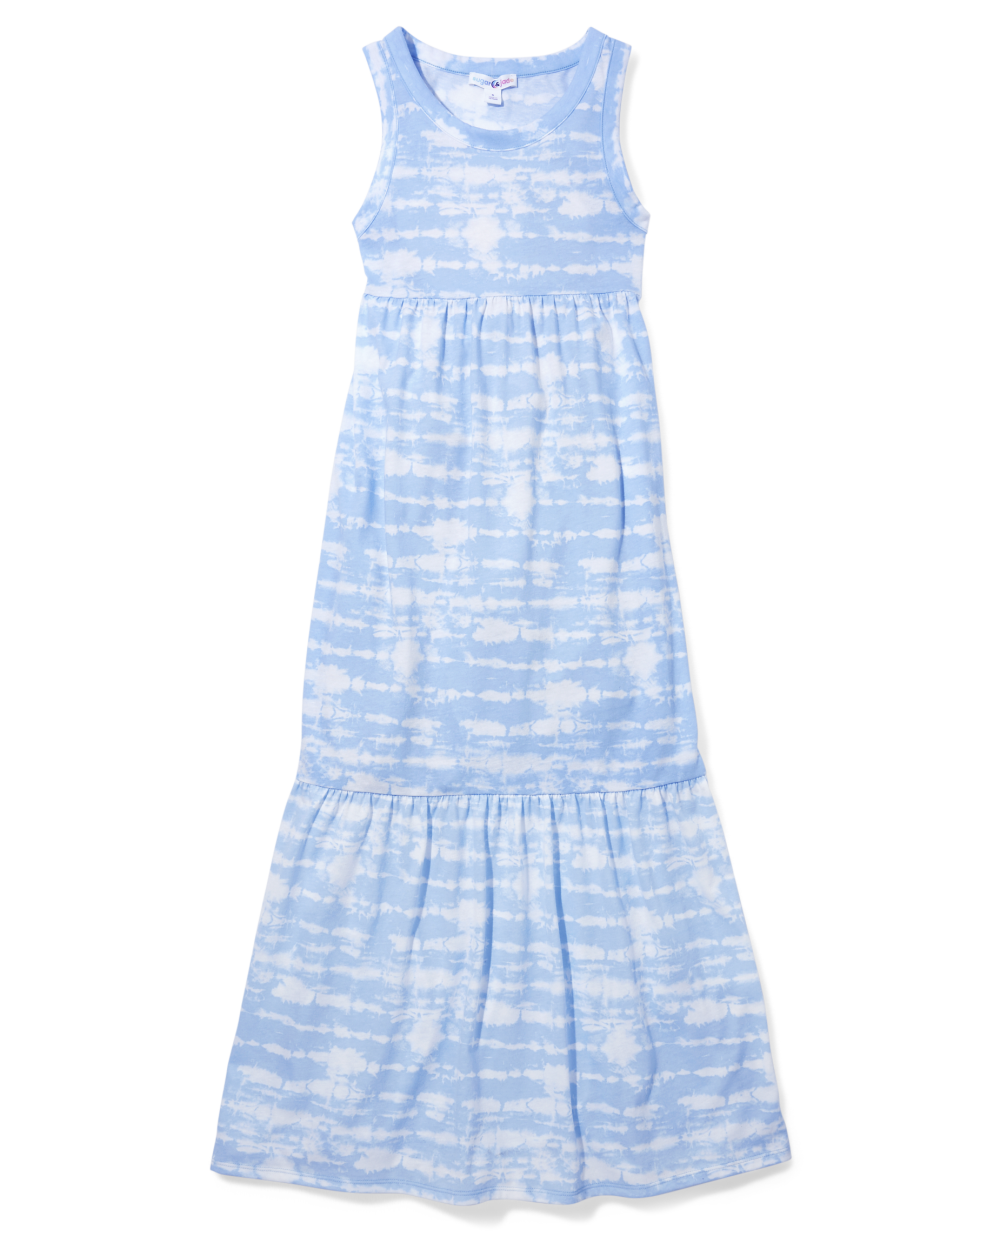 Girls Sleeveless Tank Below the Knee Tie Dye Print Round Neck Ruched Maxi Dress With Ruffles